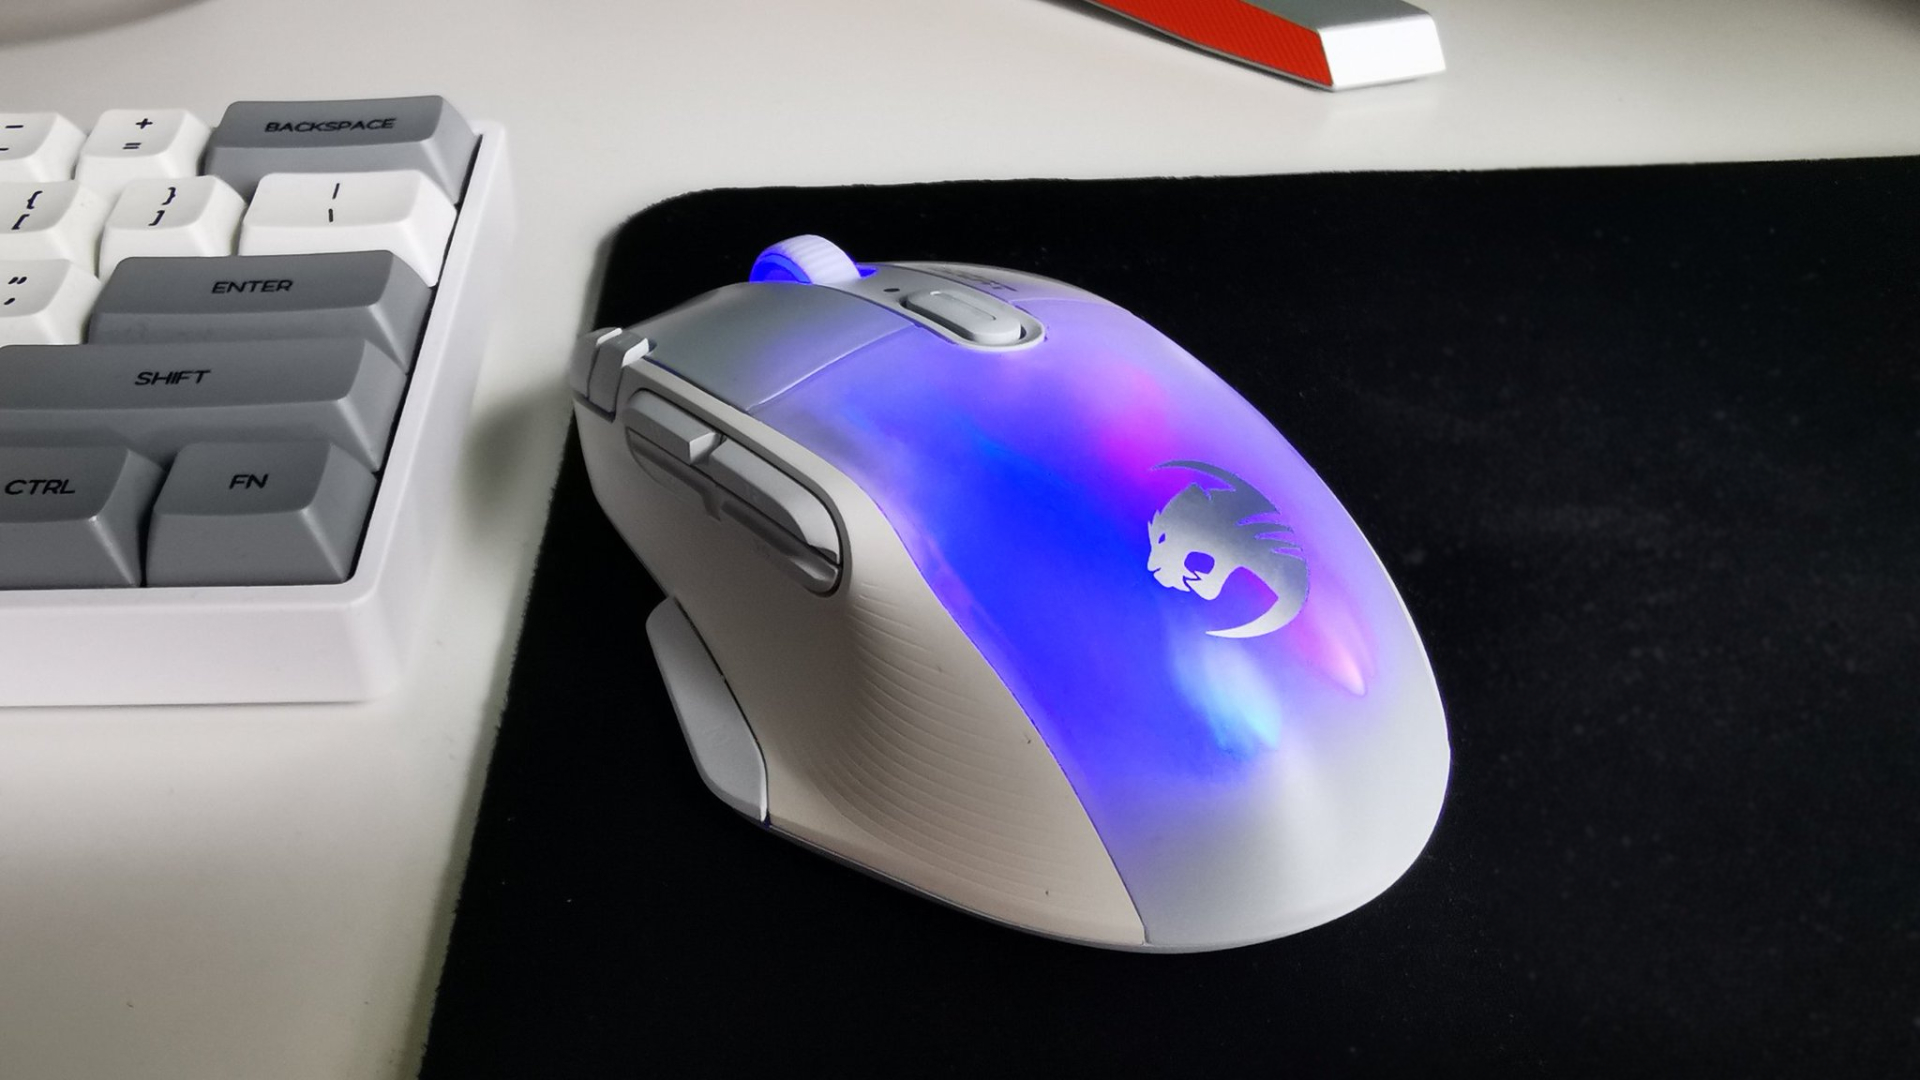 ROCCAT Kone XP Air Gaming Mouse Review